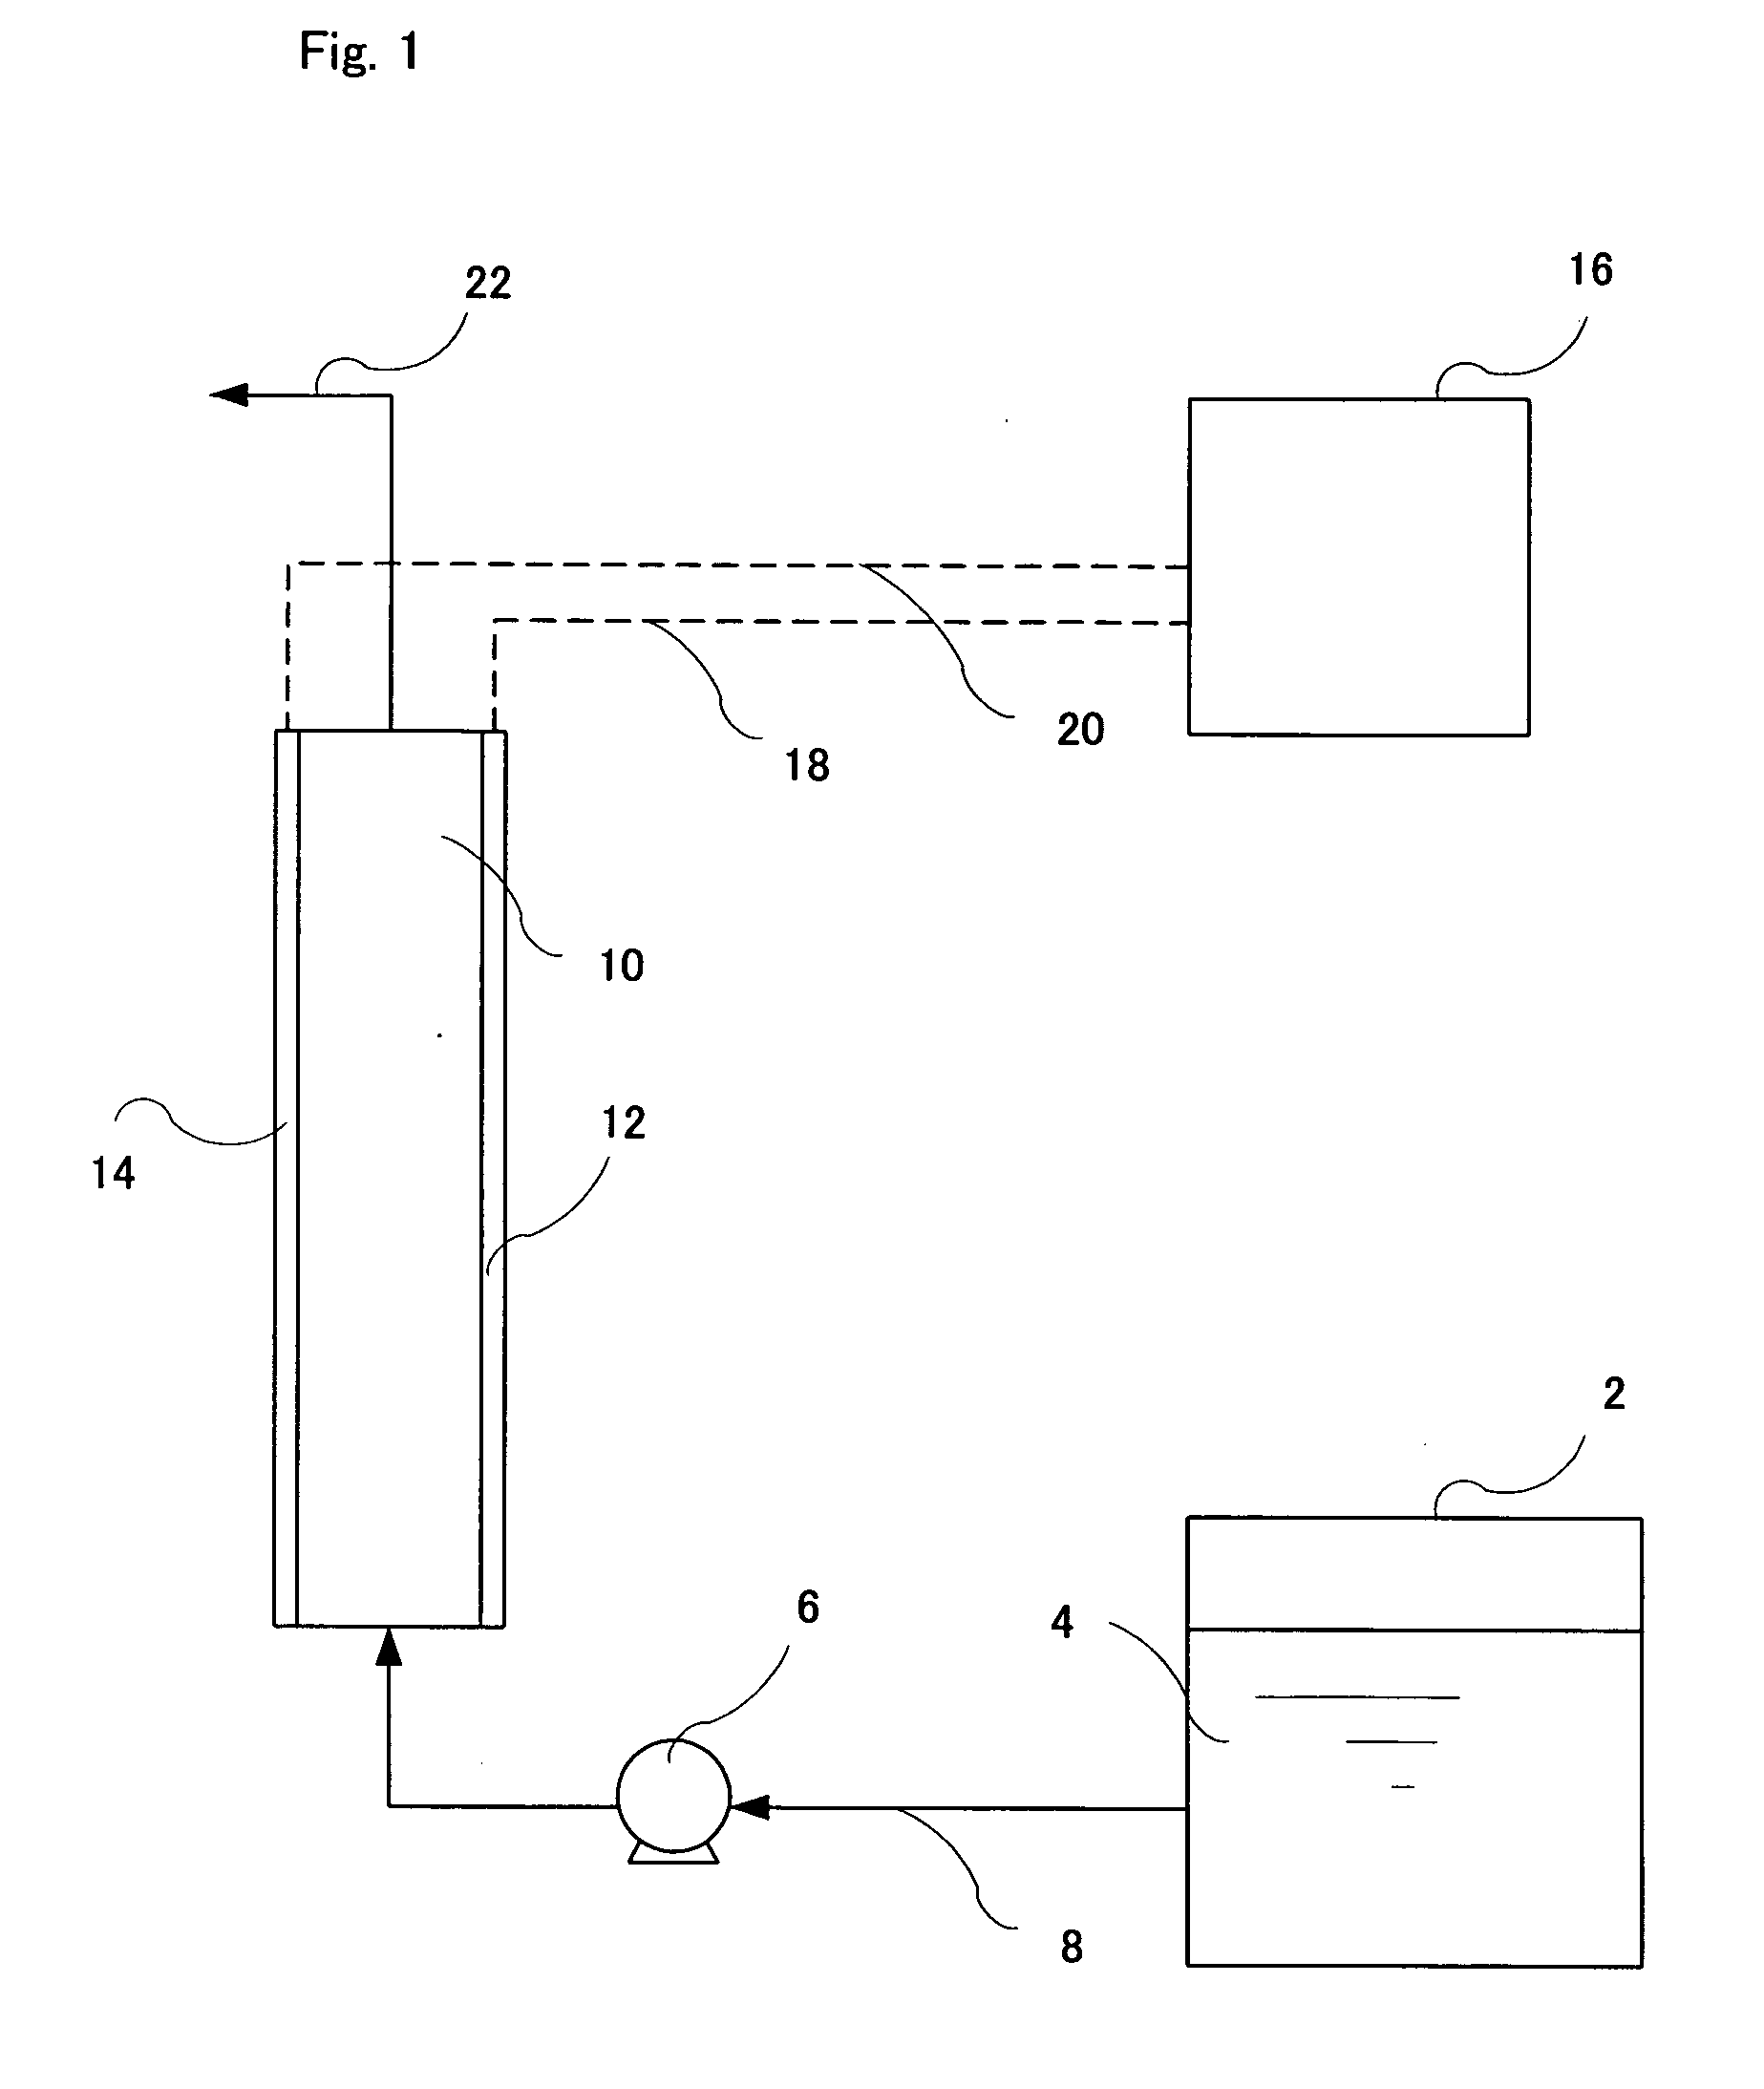 Process for preducing mixed electrolyzed water